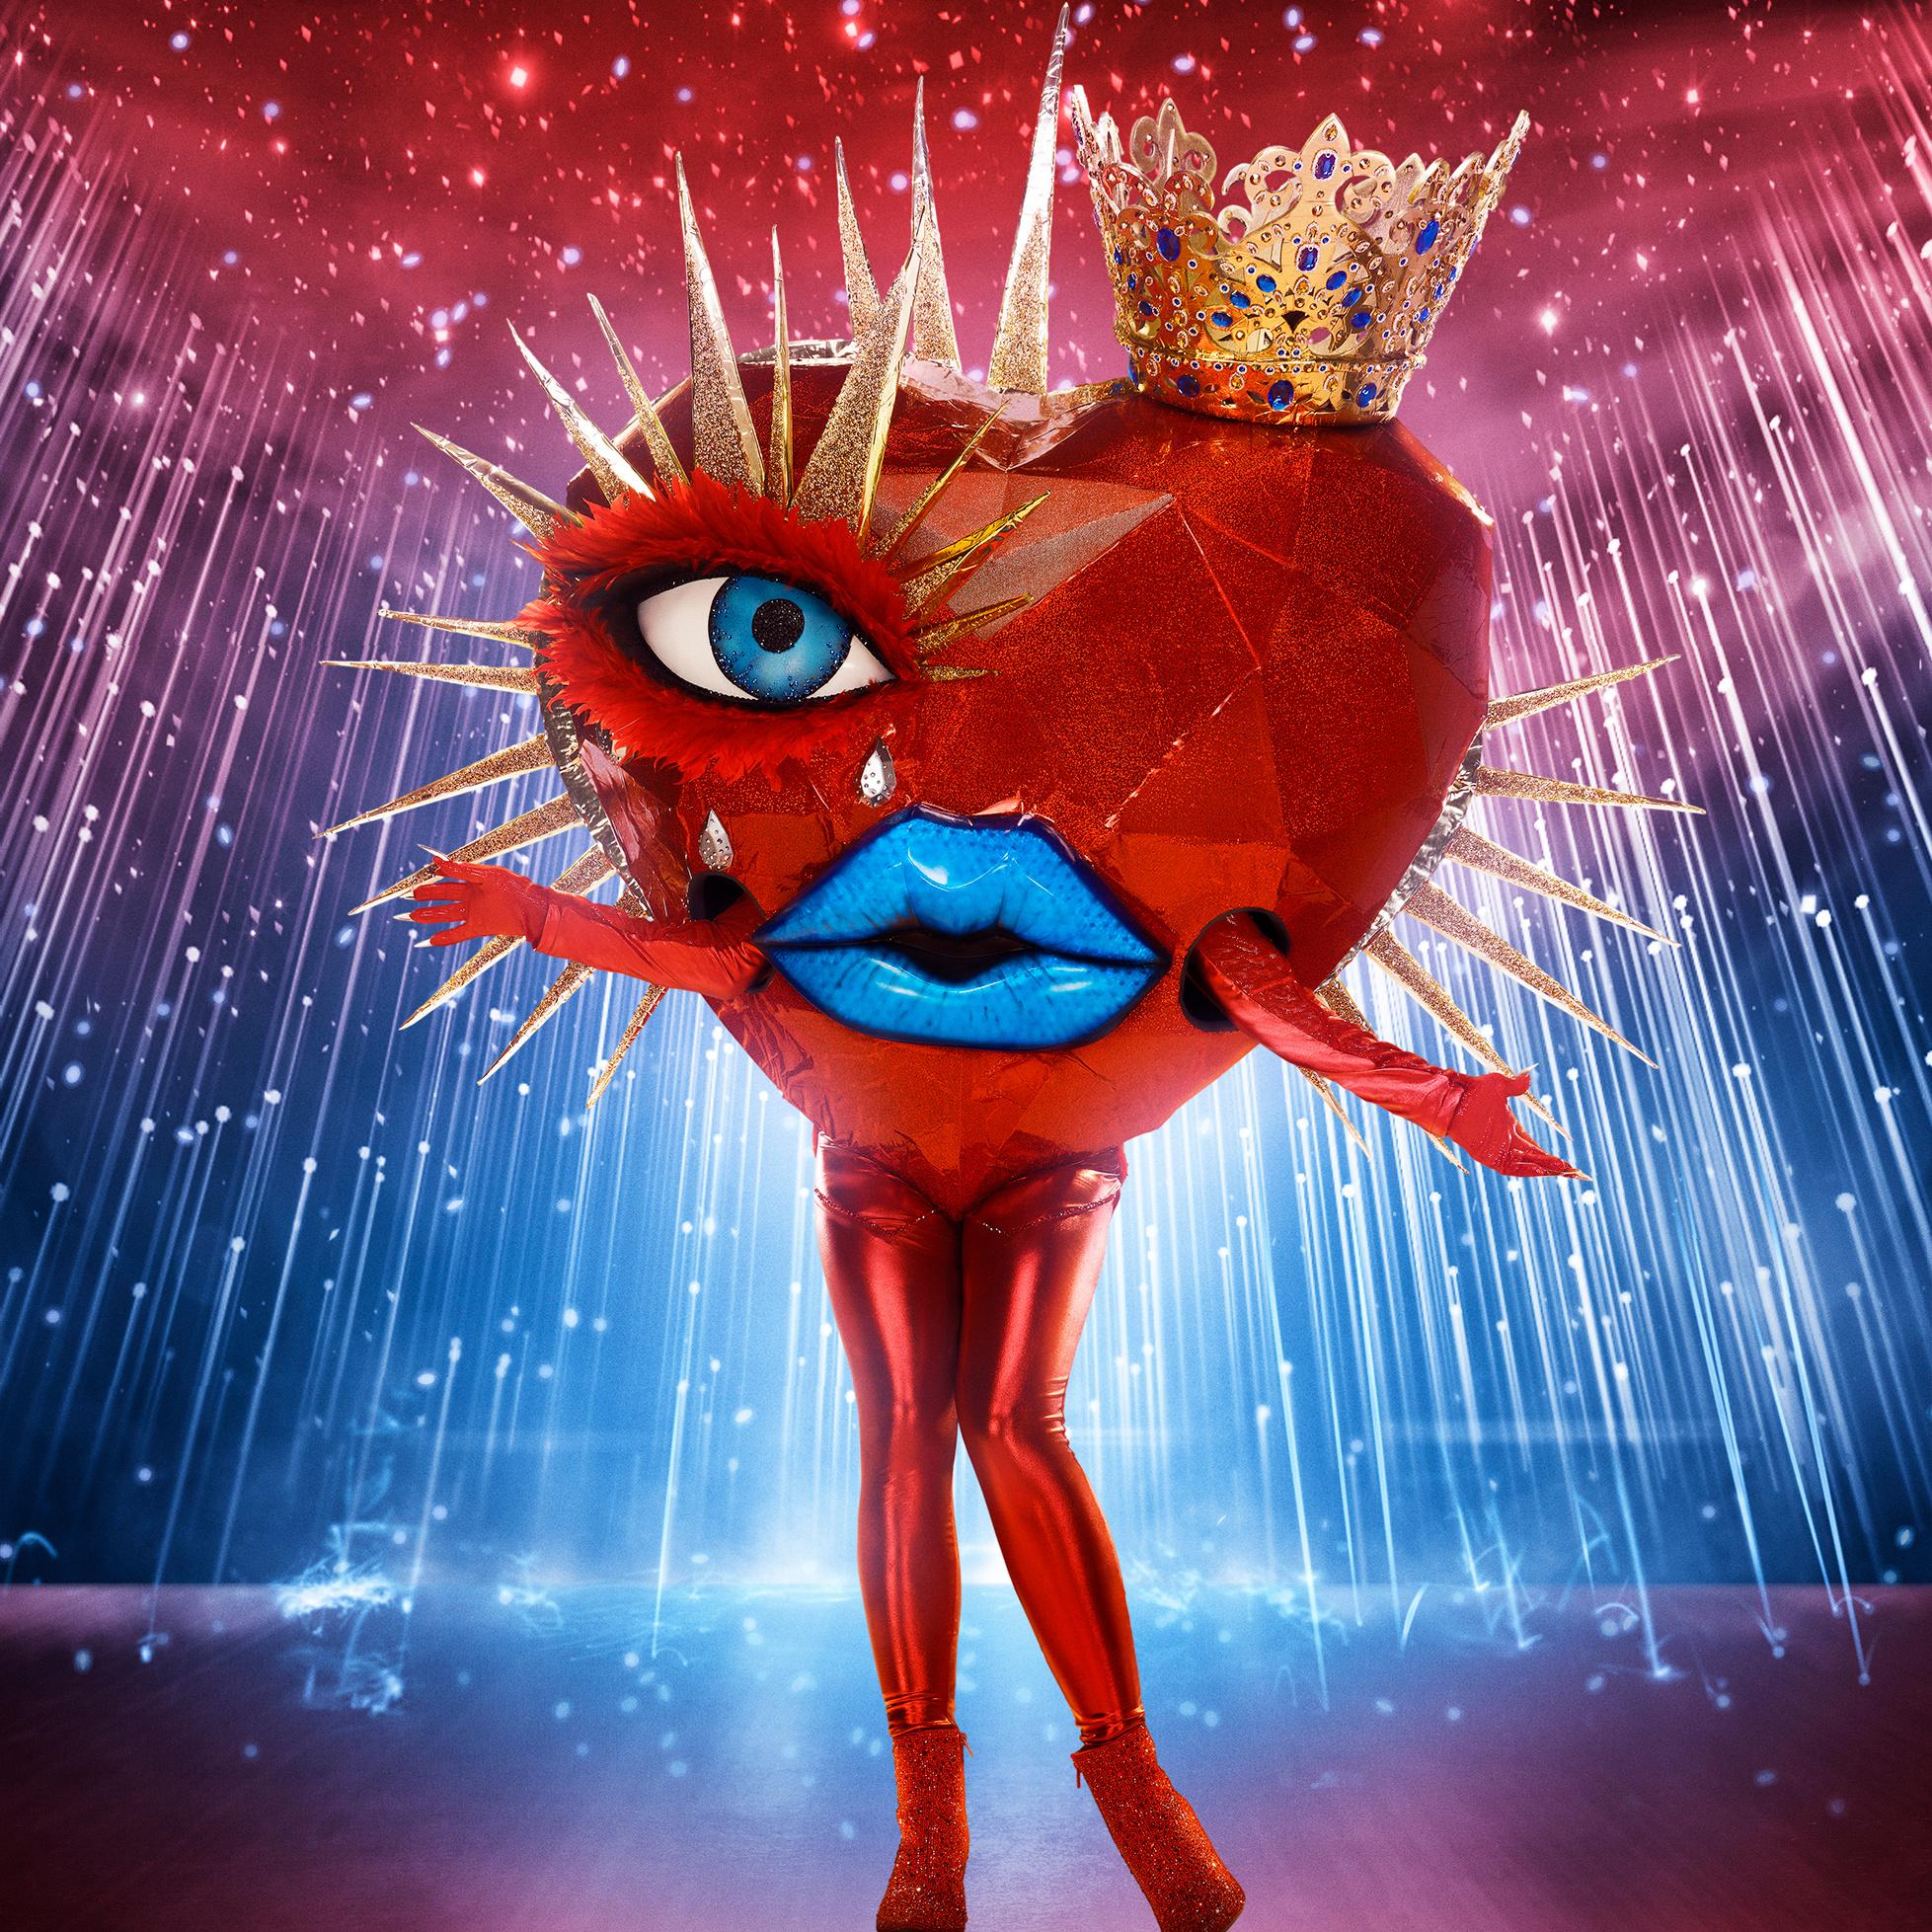 Queen of Hearts on 'The Masked Singer'